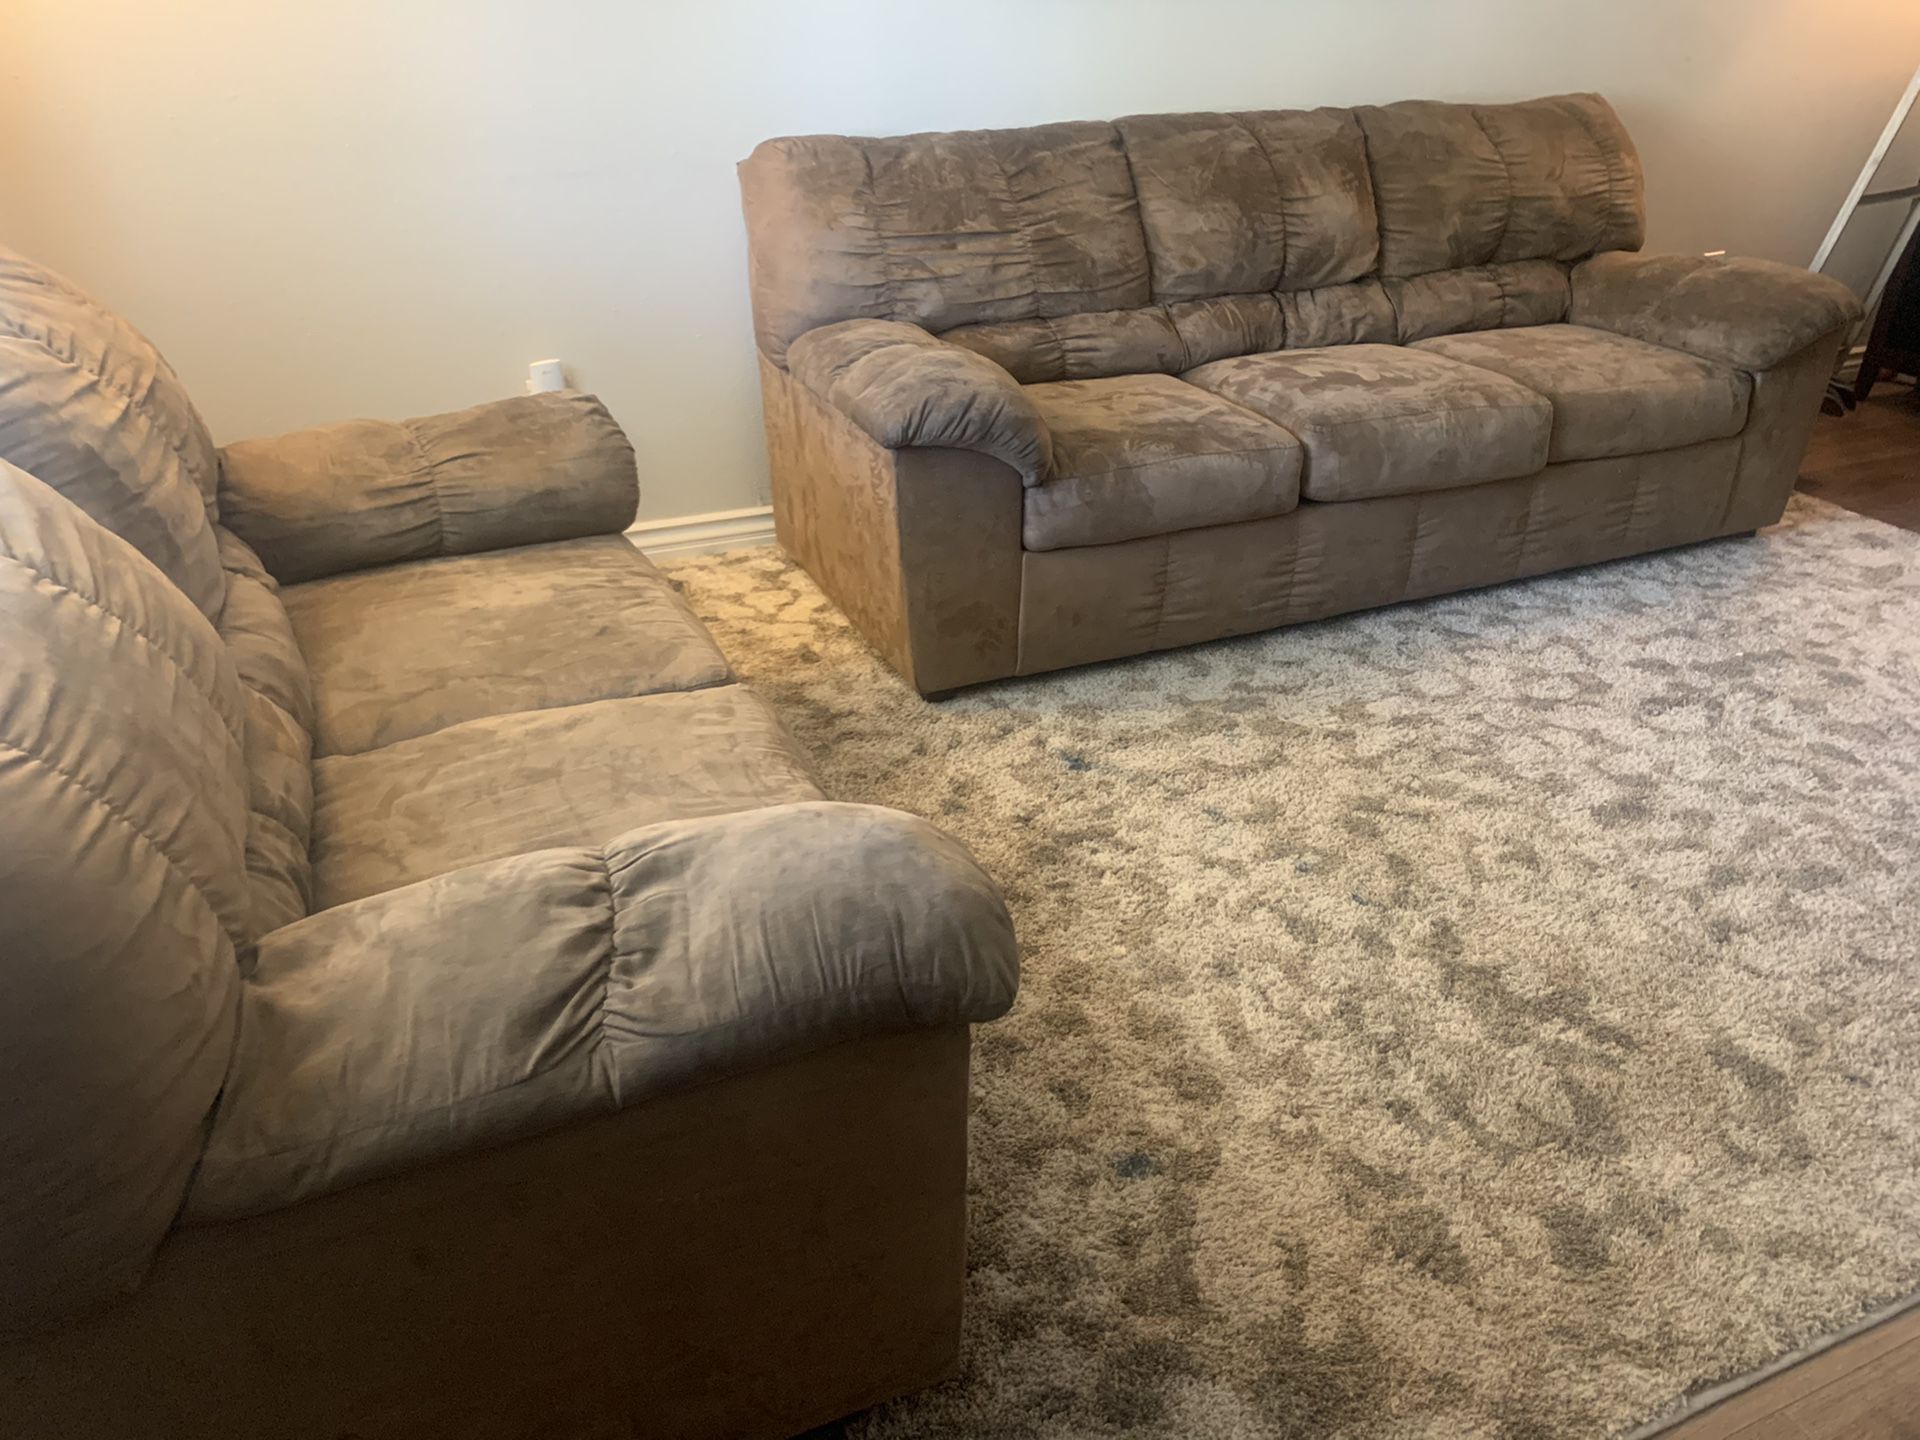 Free used couches